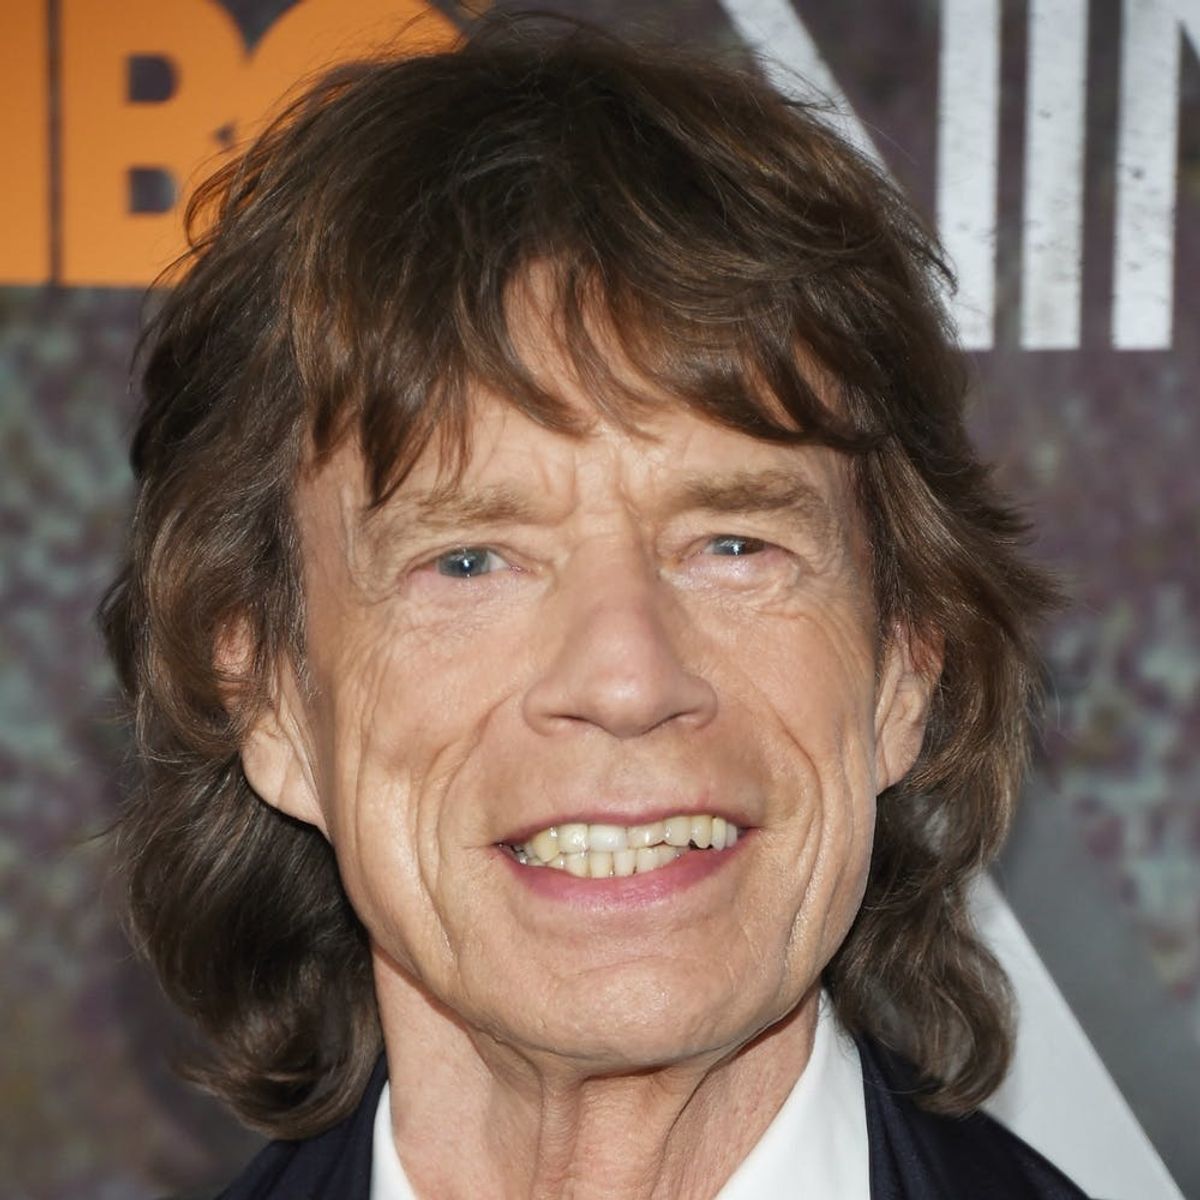 Mick Jagger’s Latest Baby News Will Make Him a Daddy Eight Times Over